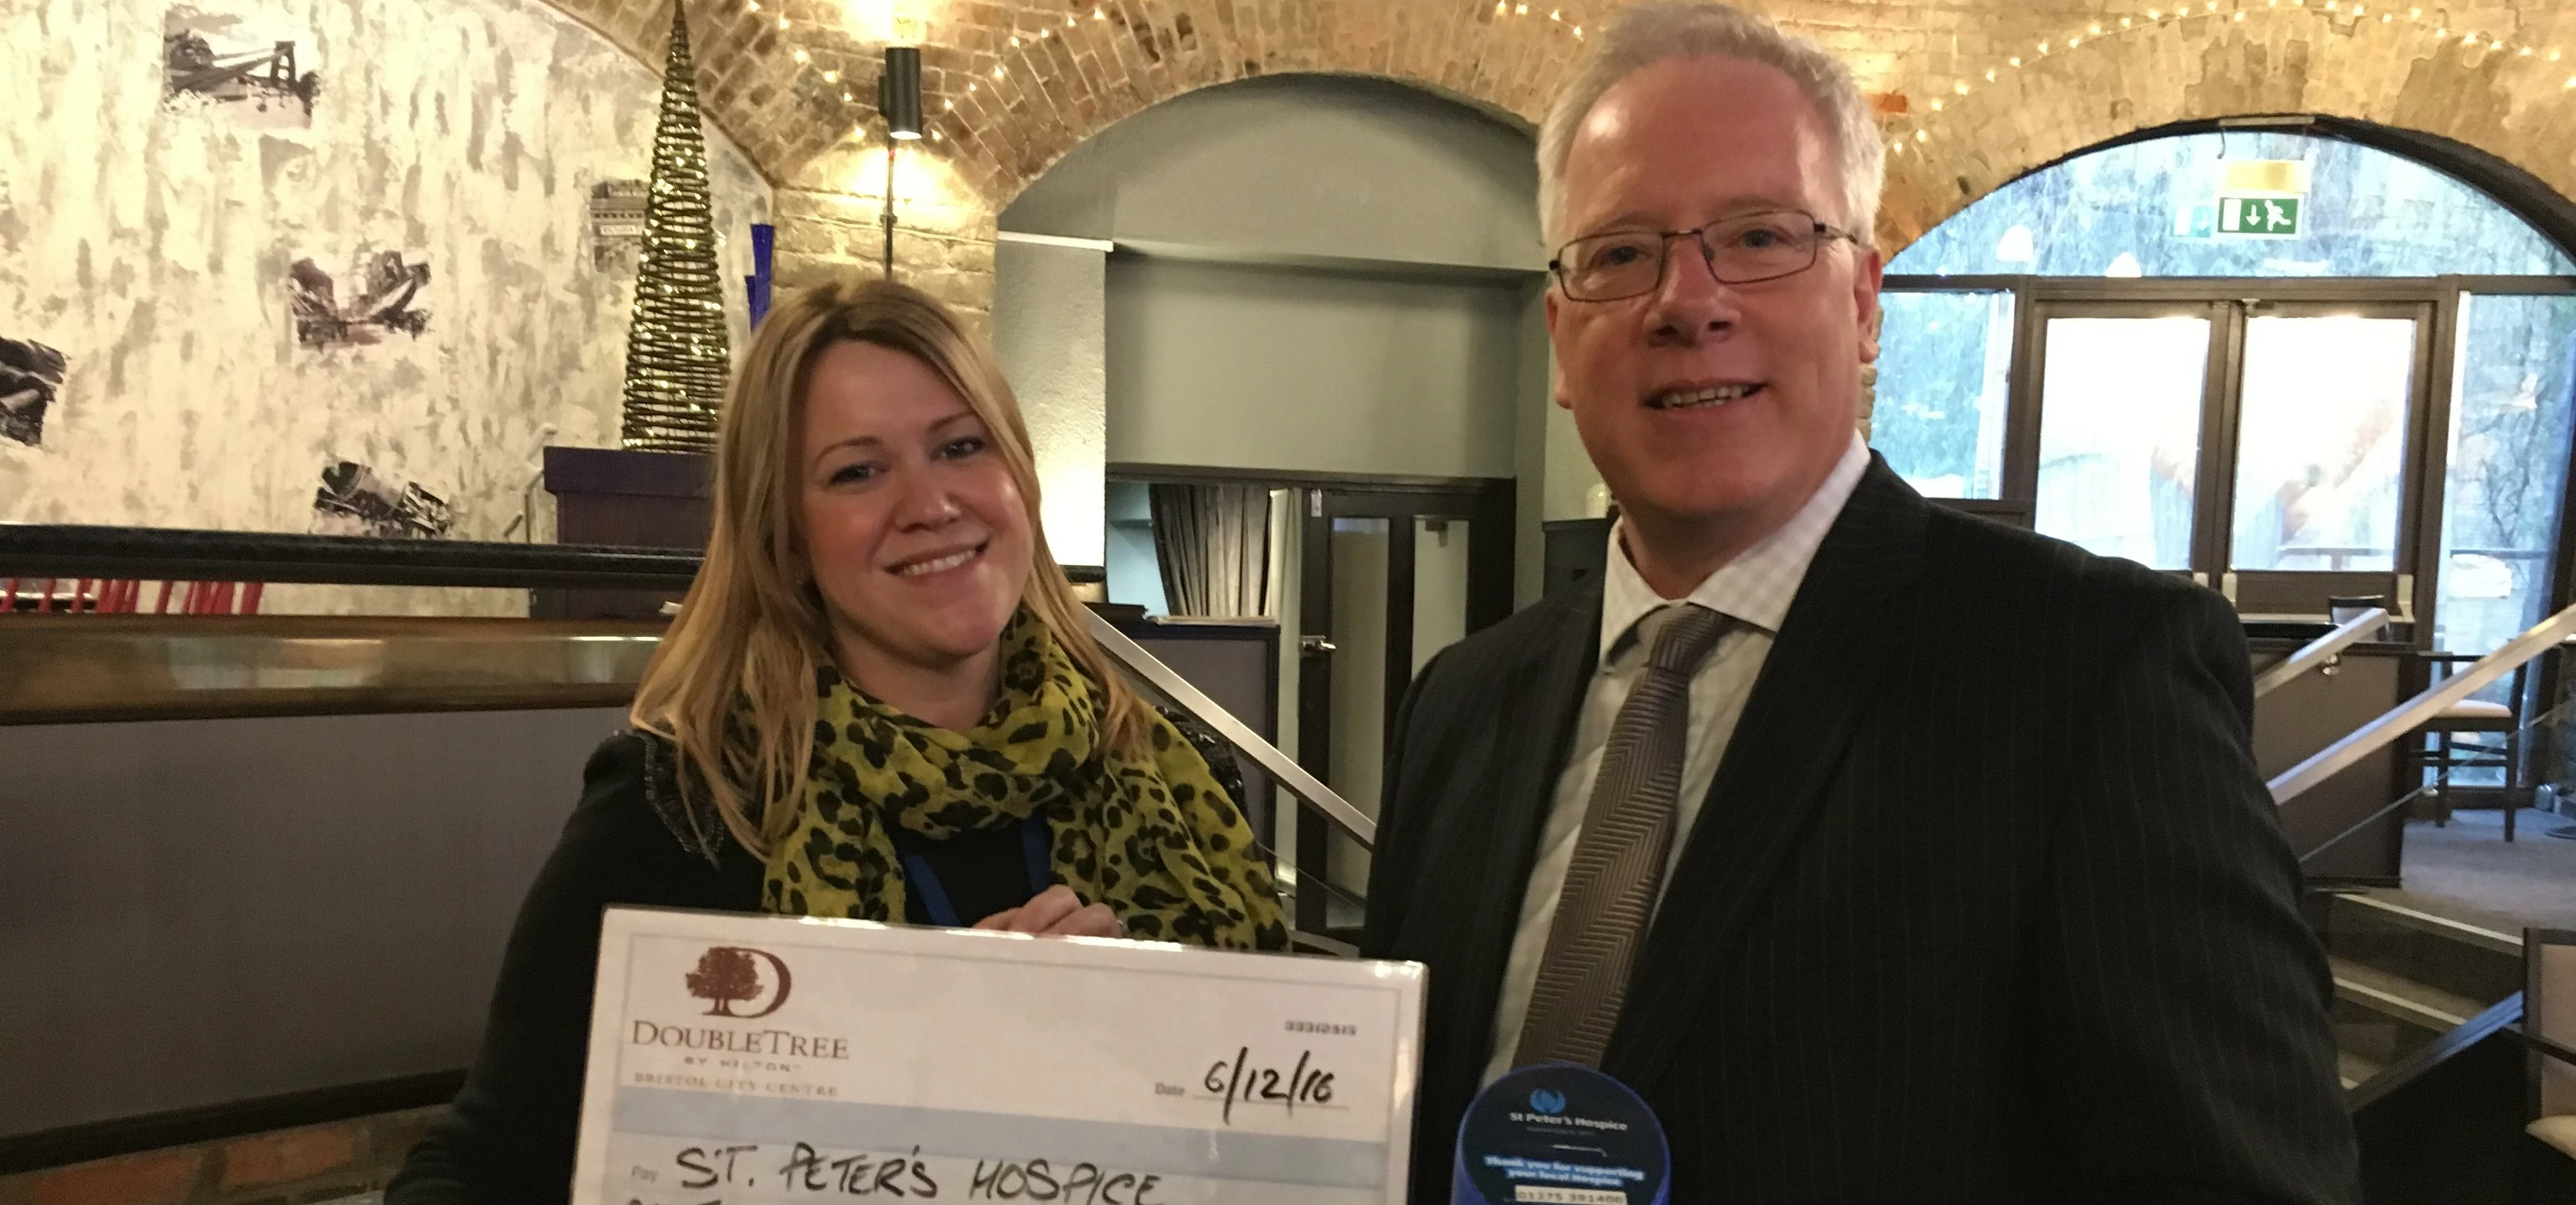 Caroline Booth-Morris with John Dowling of Doubletree by Hilton